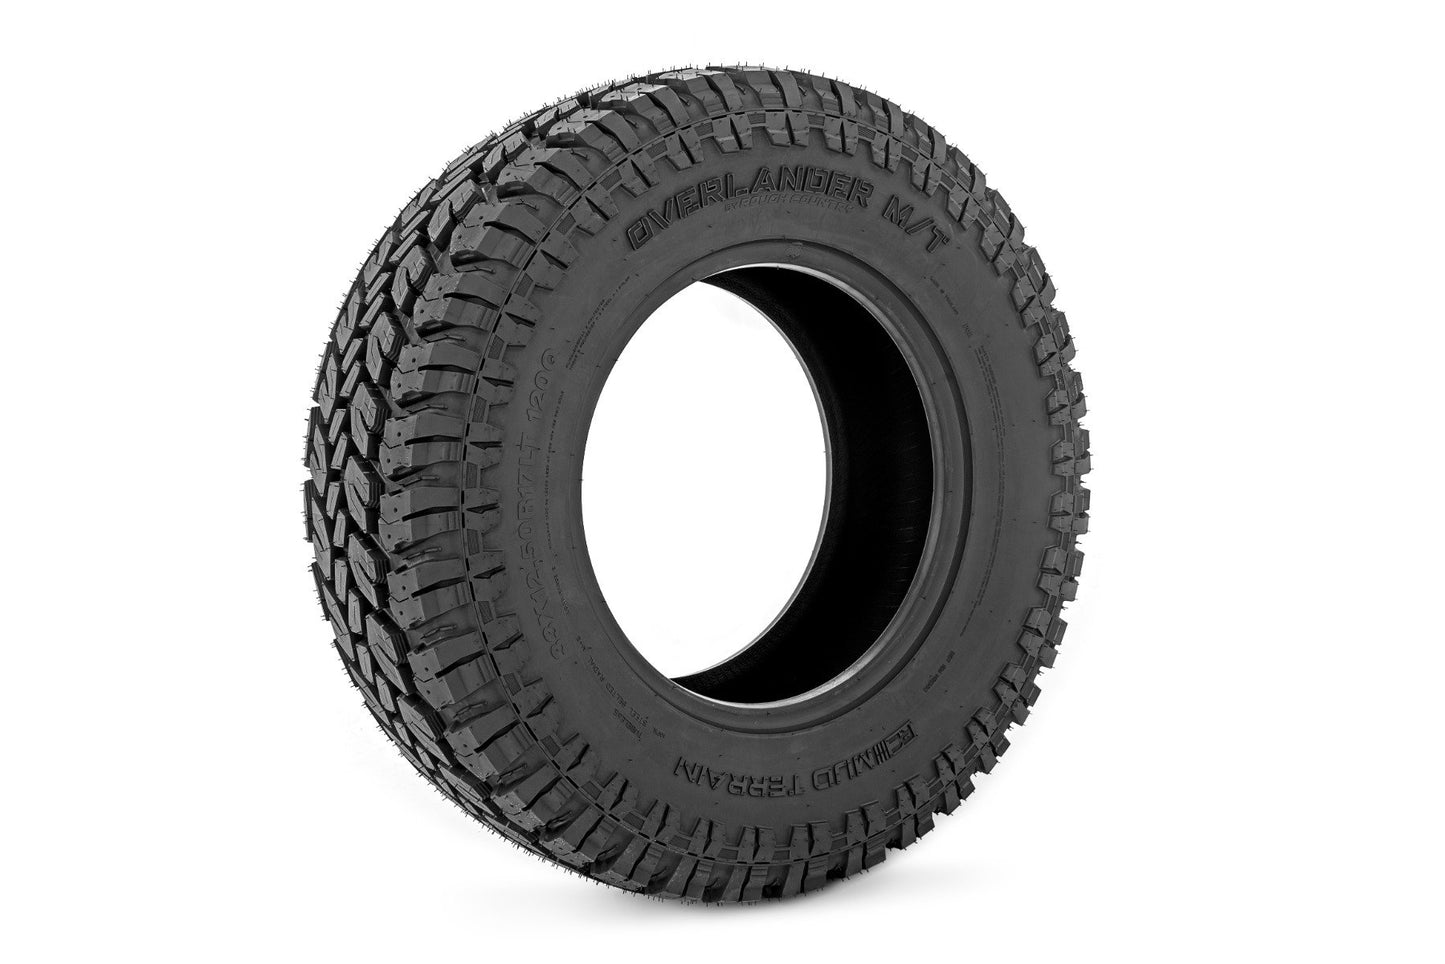 285/70R17 Rough Country Overlander M/T